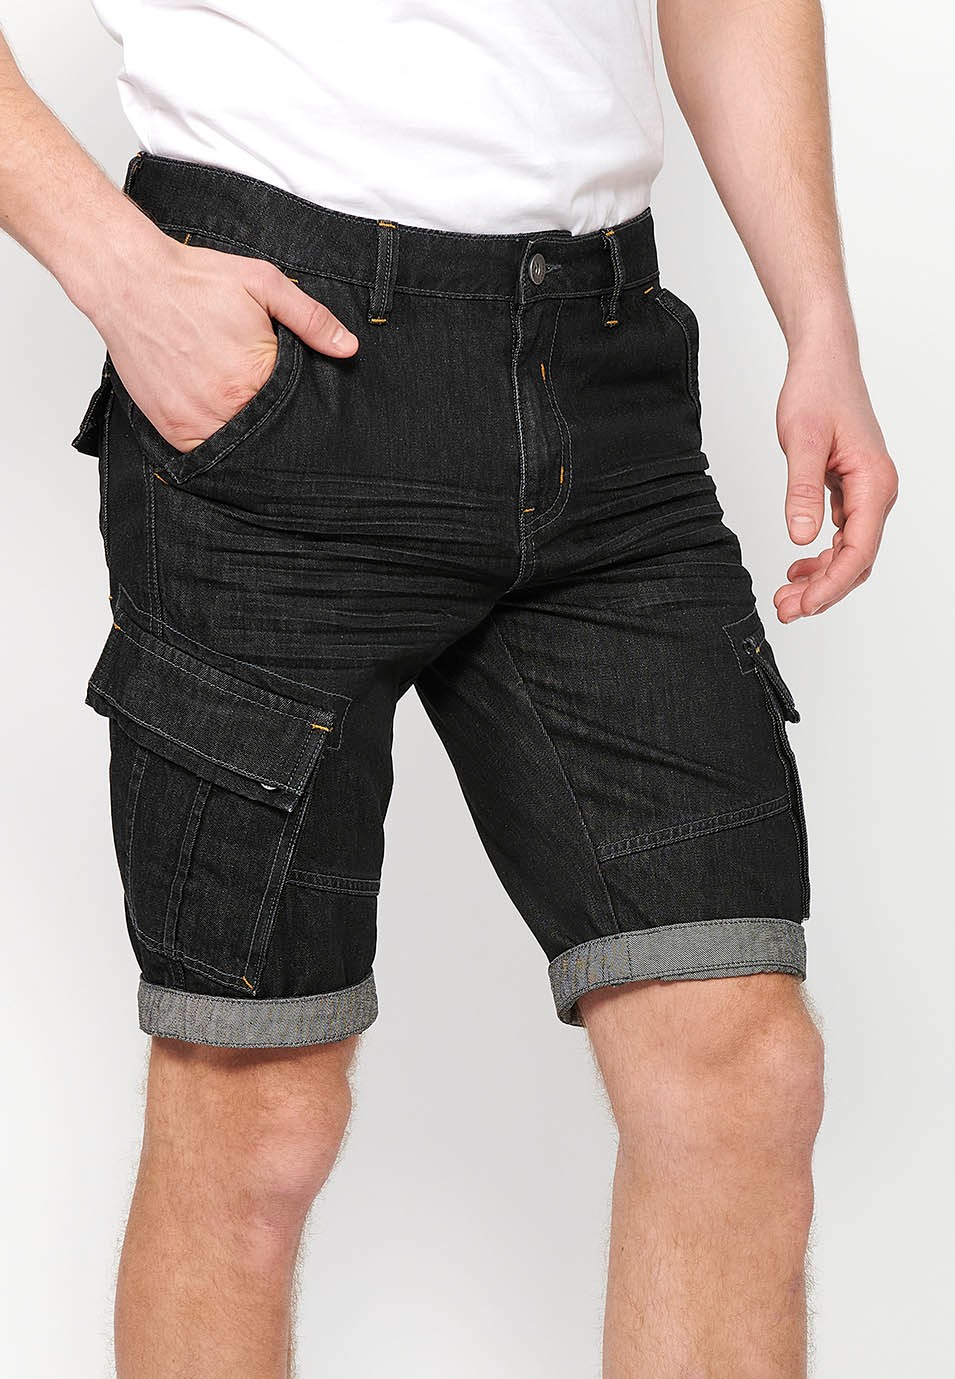 Denim Bermuda Shorts with Turn-Up Finish and Front Zipper and Button Closure with Pockets, One Ticket Pocket and Two Side Pockets in Black for Men 2